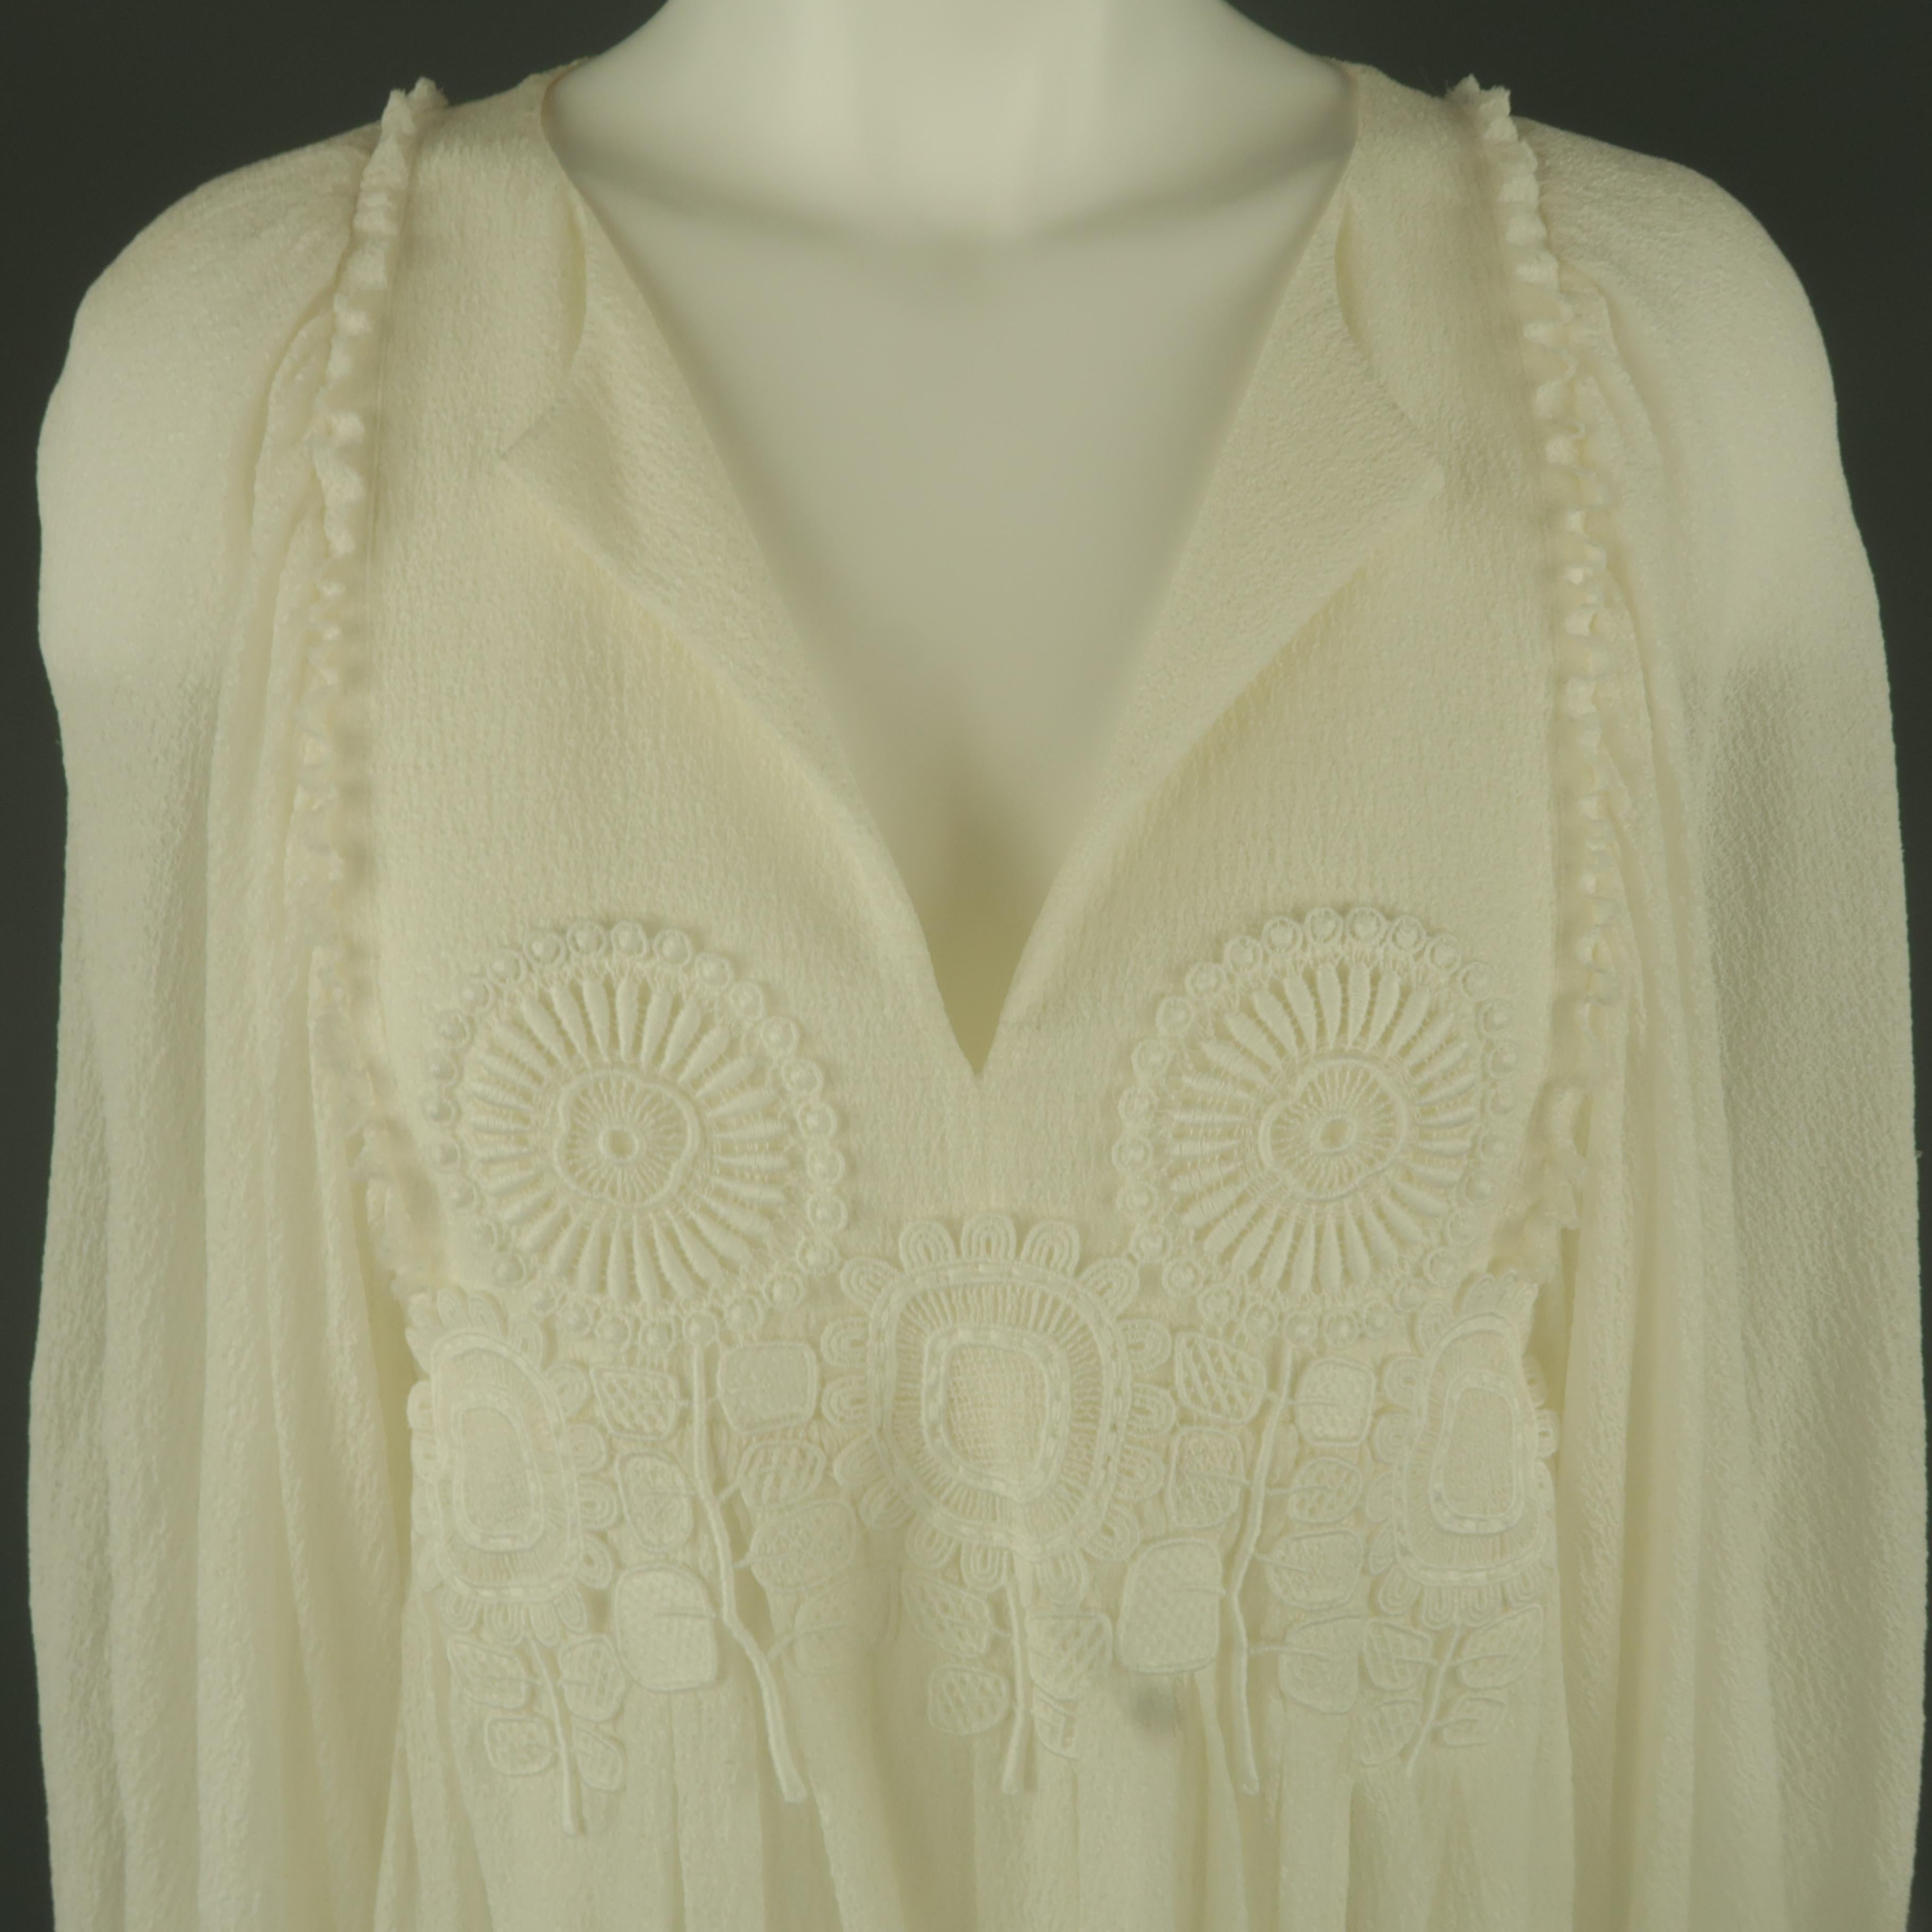 CHLOE tunic blouse comes in cream silk textured crepe with a slit neckline, embroidered appliques, ruffled trim, gathered A line silhouette, and balloon sleeves. Made in France.
 
Excellent Pre-Owned Condition. Retails: $1,600.00.
Marked: FR 40
